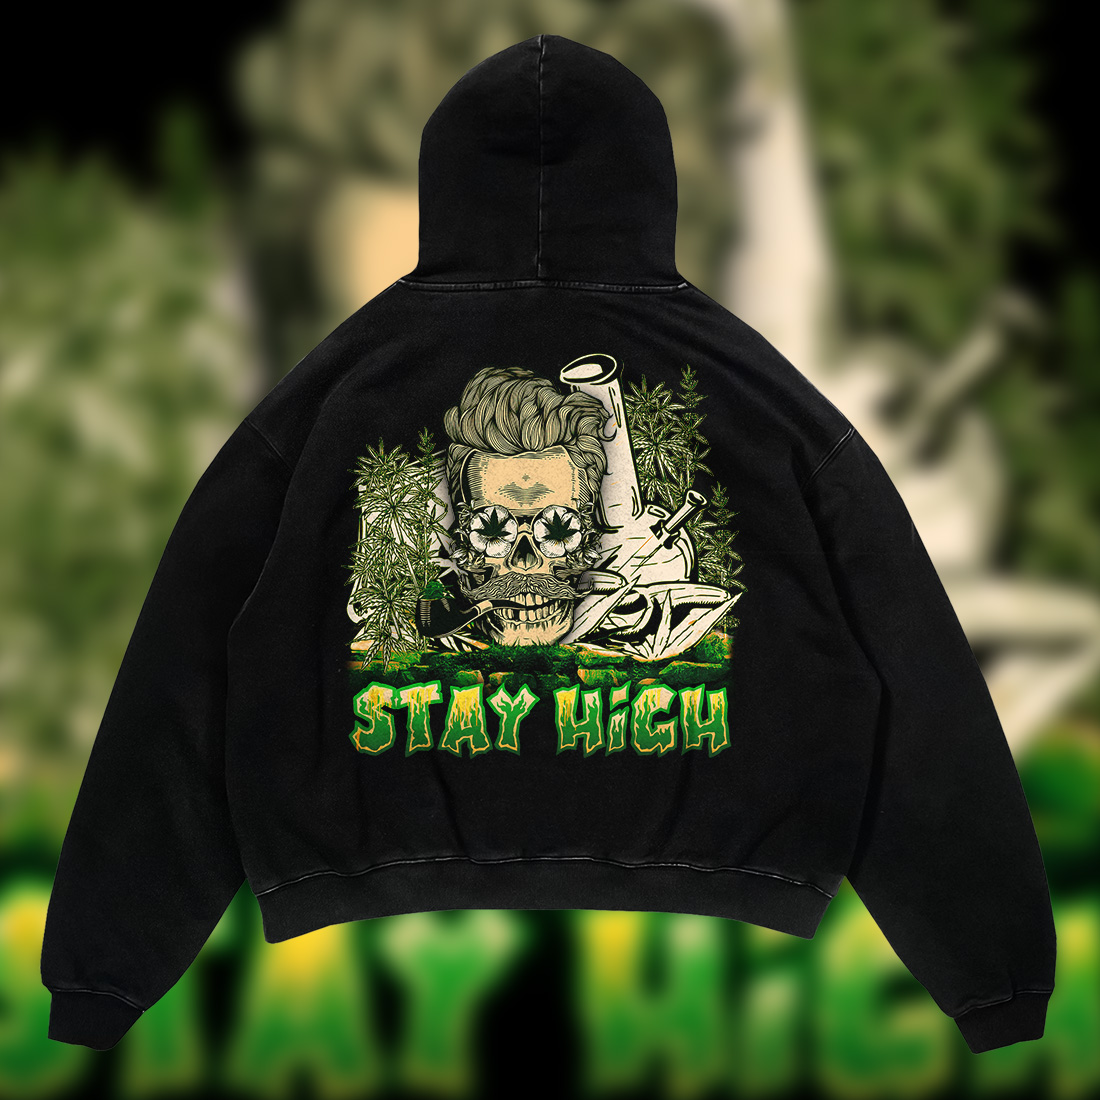 Stay High–Urban Graphic Streetwear T-Shirt Design cover image.